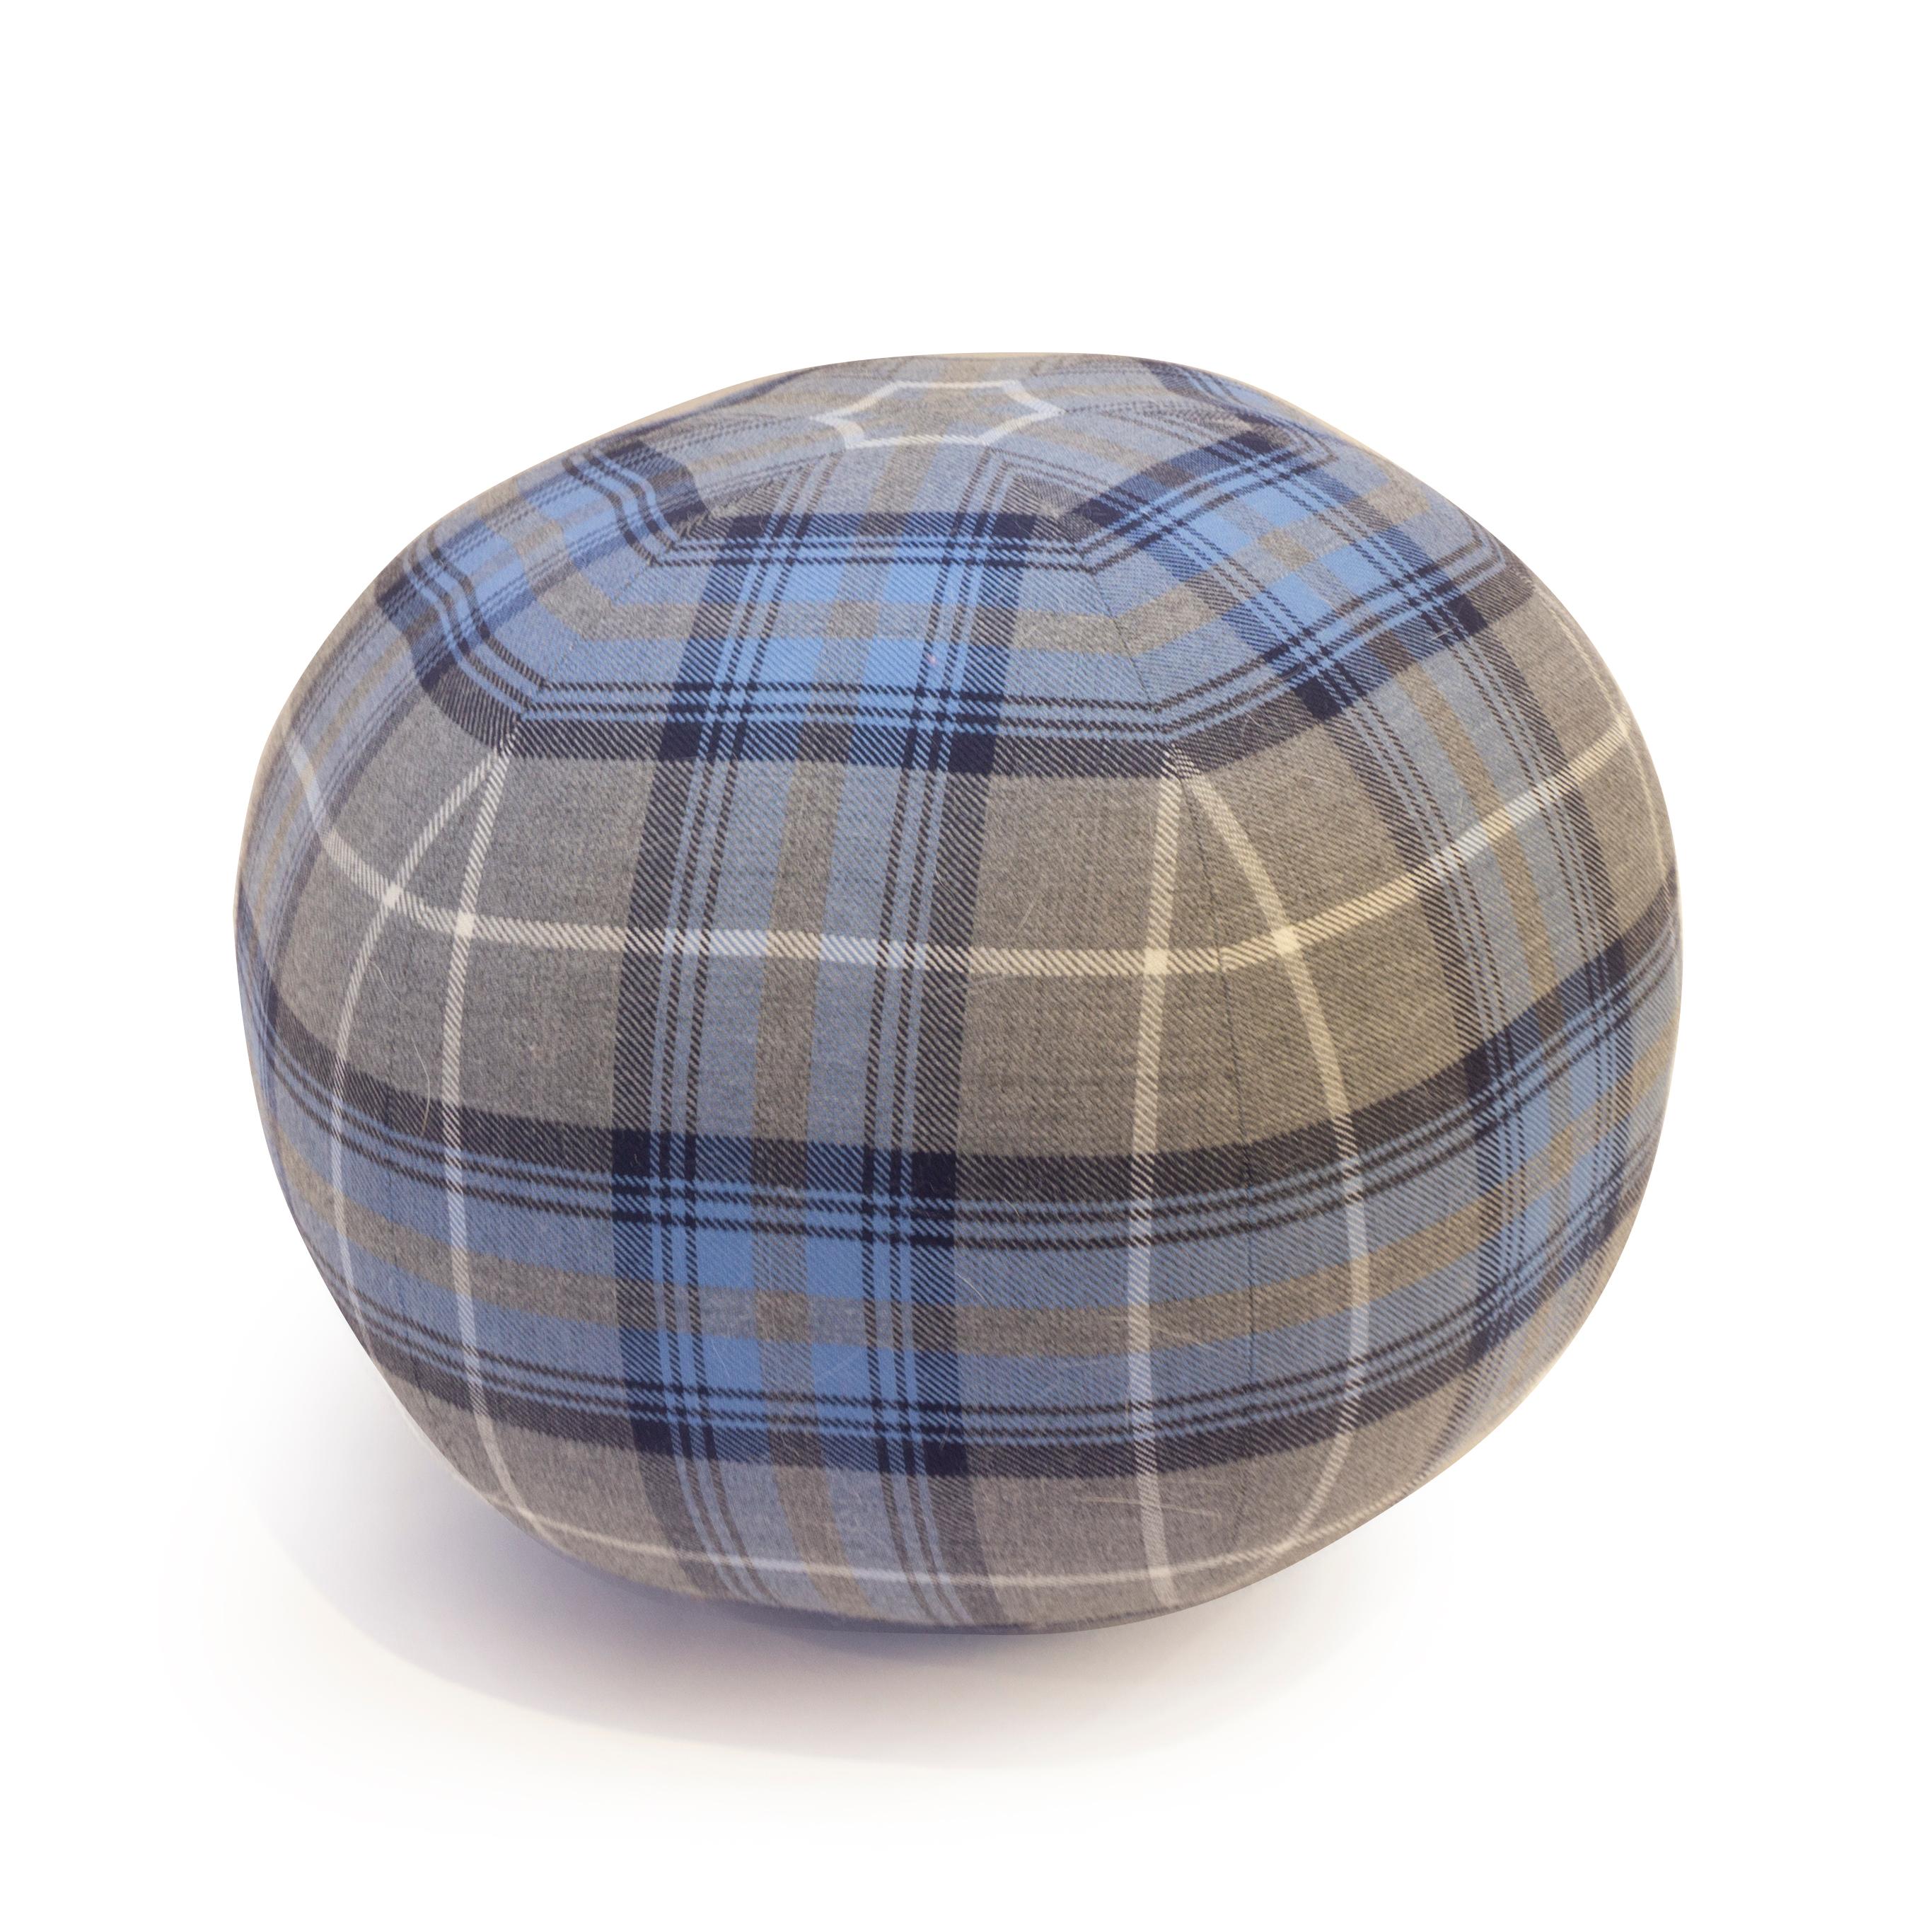 A round ball throw pillow hand sewn in a blue tartan plaid design. All pillows are handmade in our studio in Norwalk, Connecticut. 

Measurements: 10